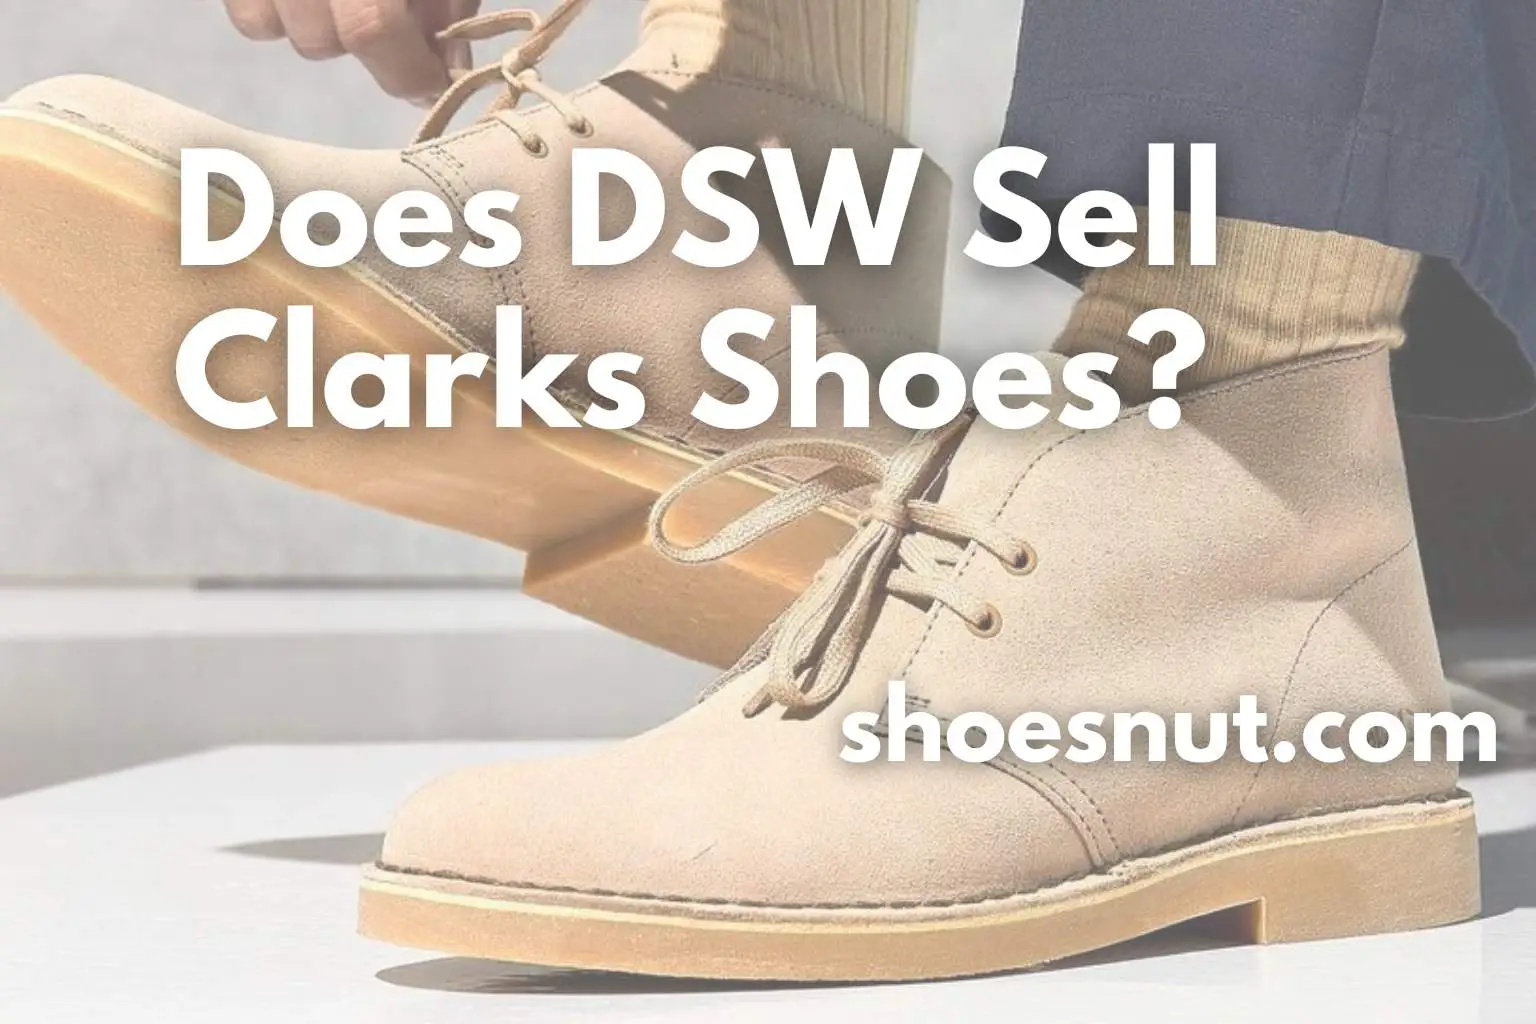 Does DSW Sell Clarks Shoes?